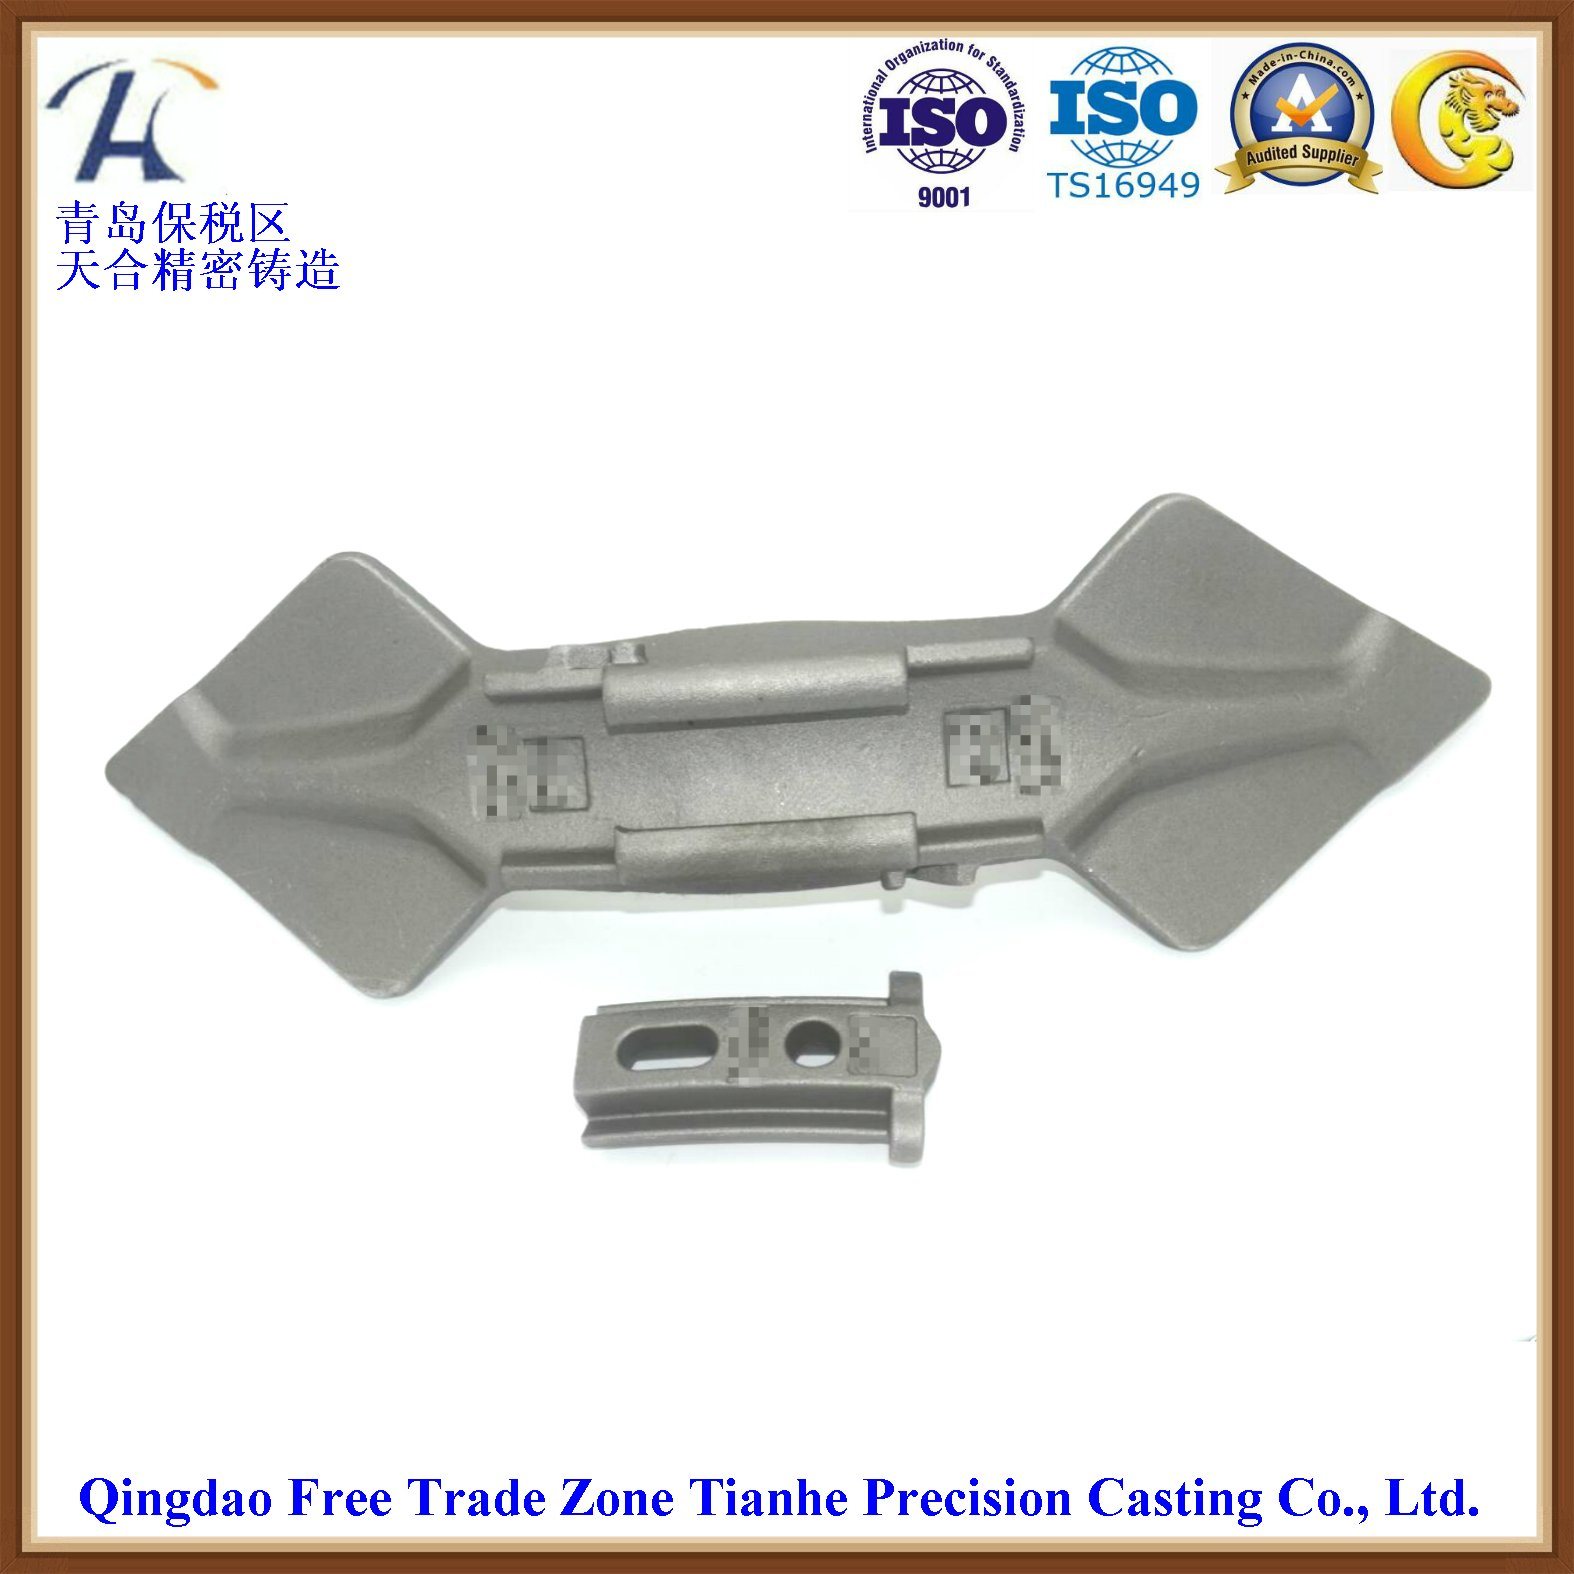 Agricultural Machine Parts, Seeding, Farming, Steel, Lost-Wax, Precision, Investment Casting